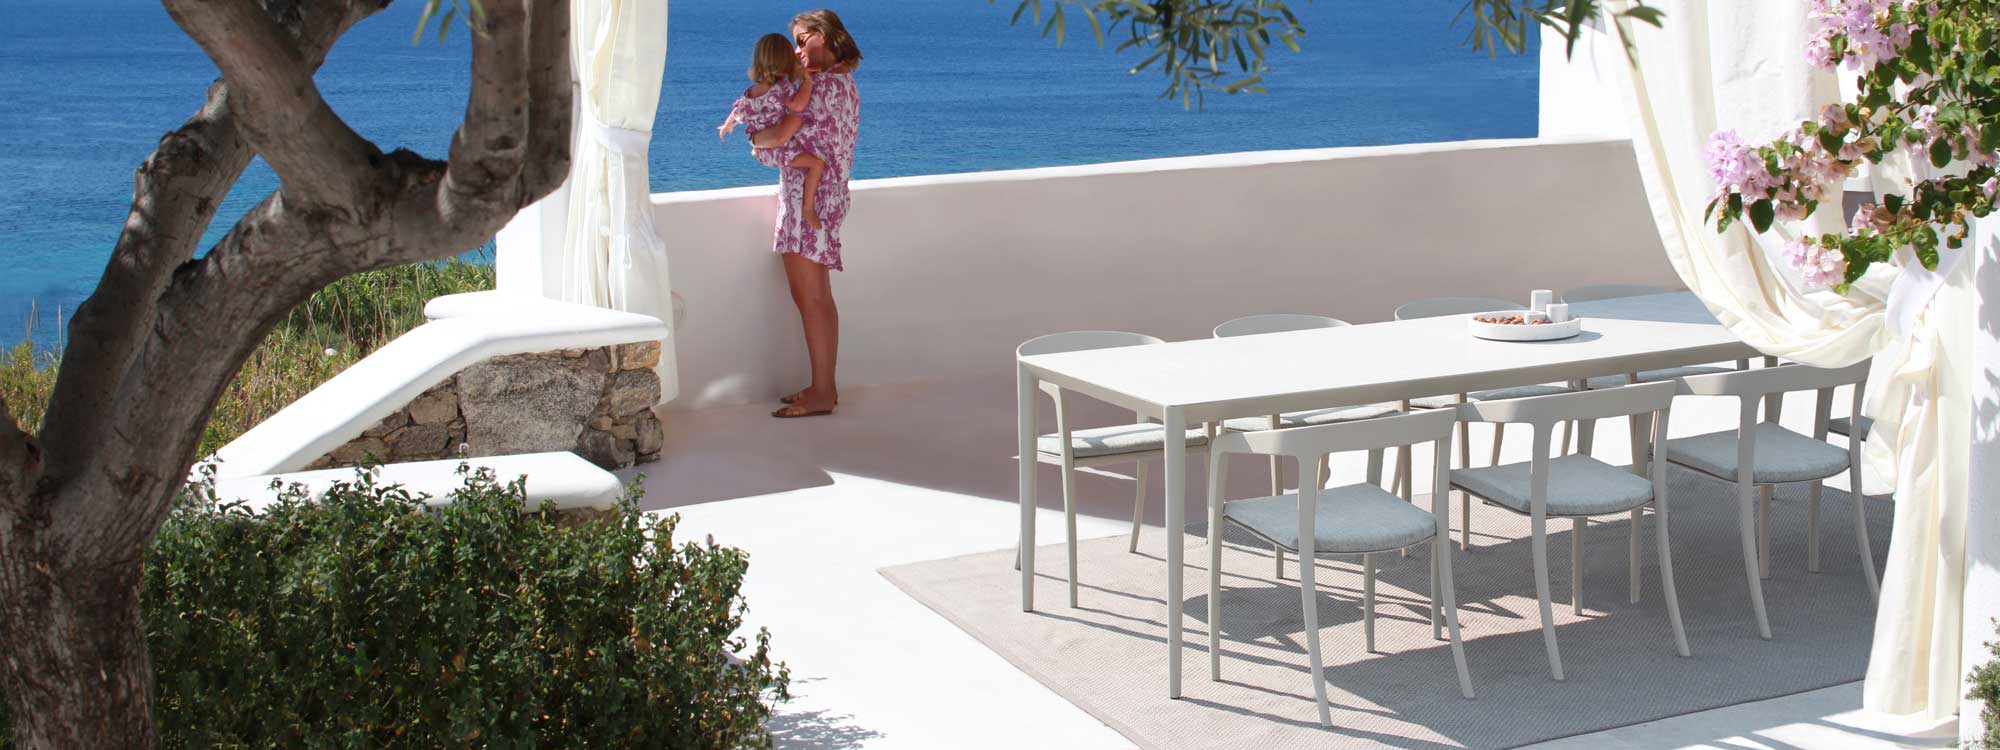 Image of Royal Botania Jive & U-NITE outdoor dining furniture in white with azure Ionian sea in background